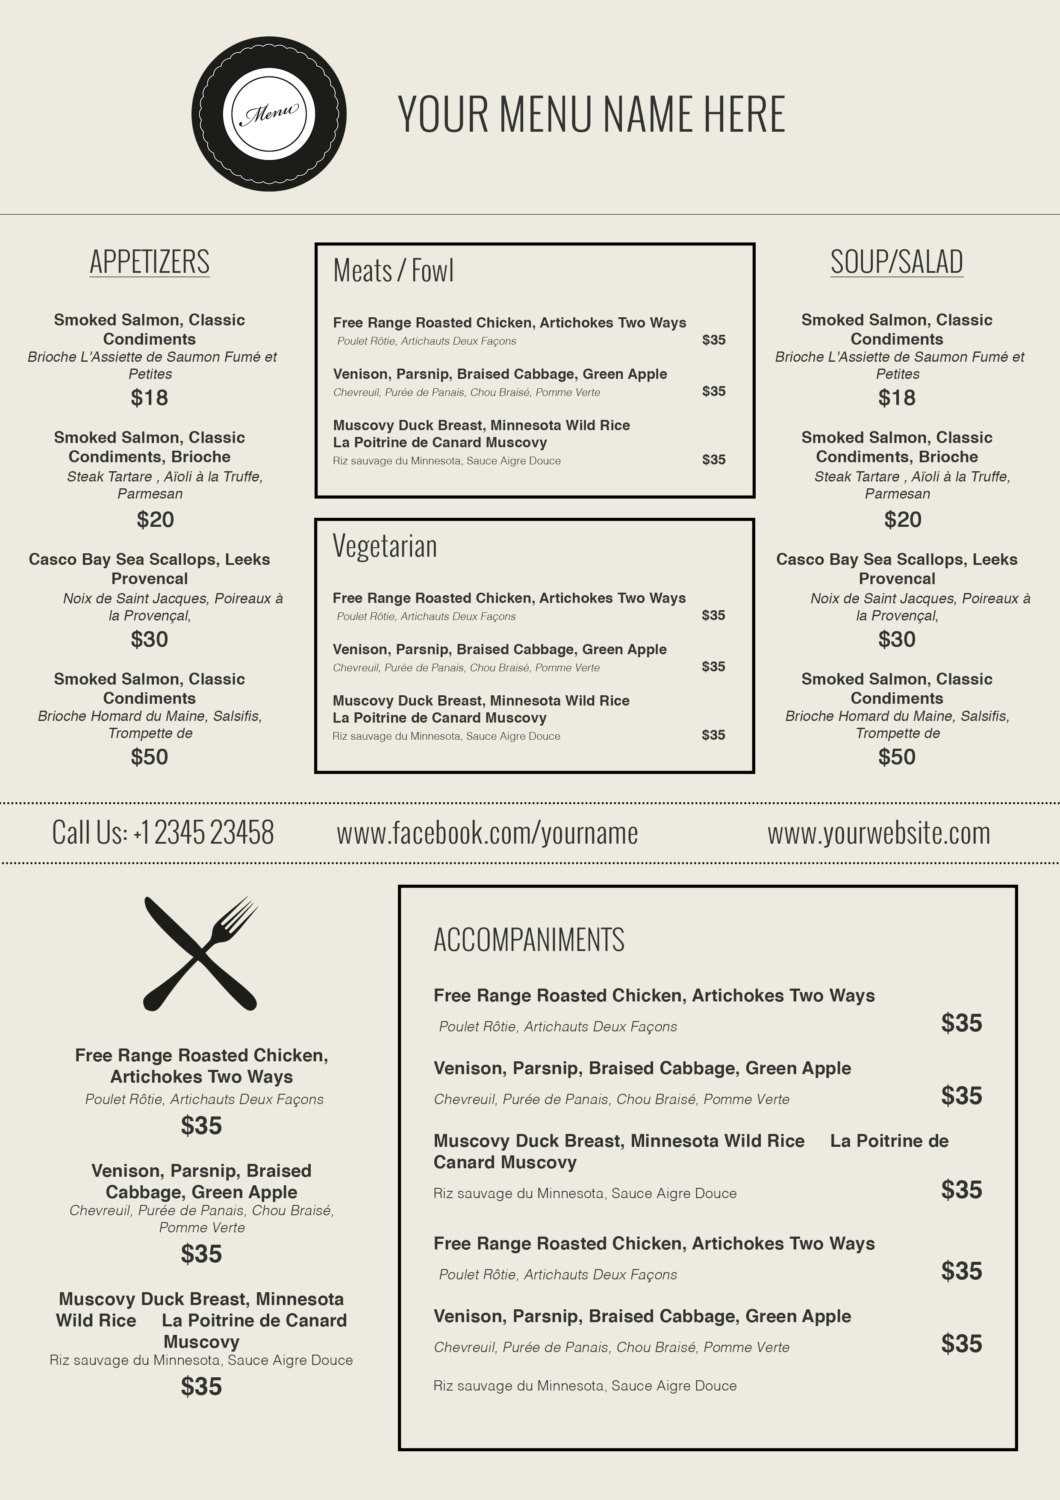 1653499 Restaurant Menu Templates Word | Wiring Resources Intended For Free Cafe Menu Templates For Word